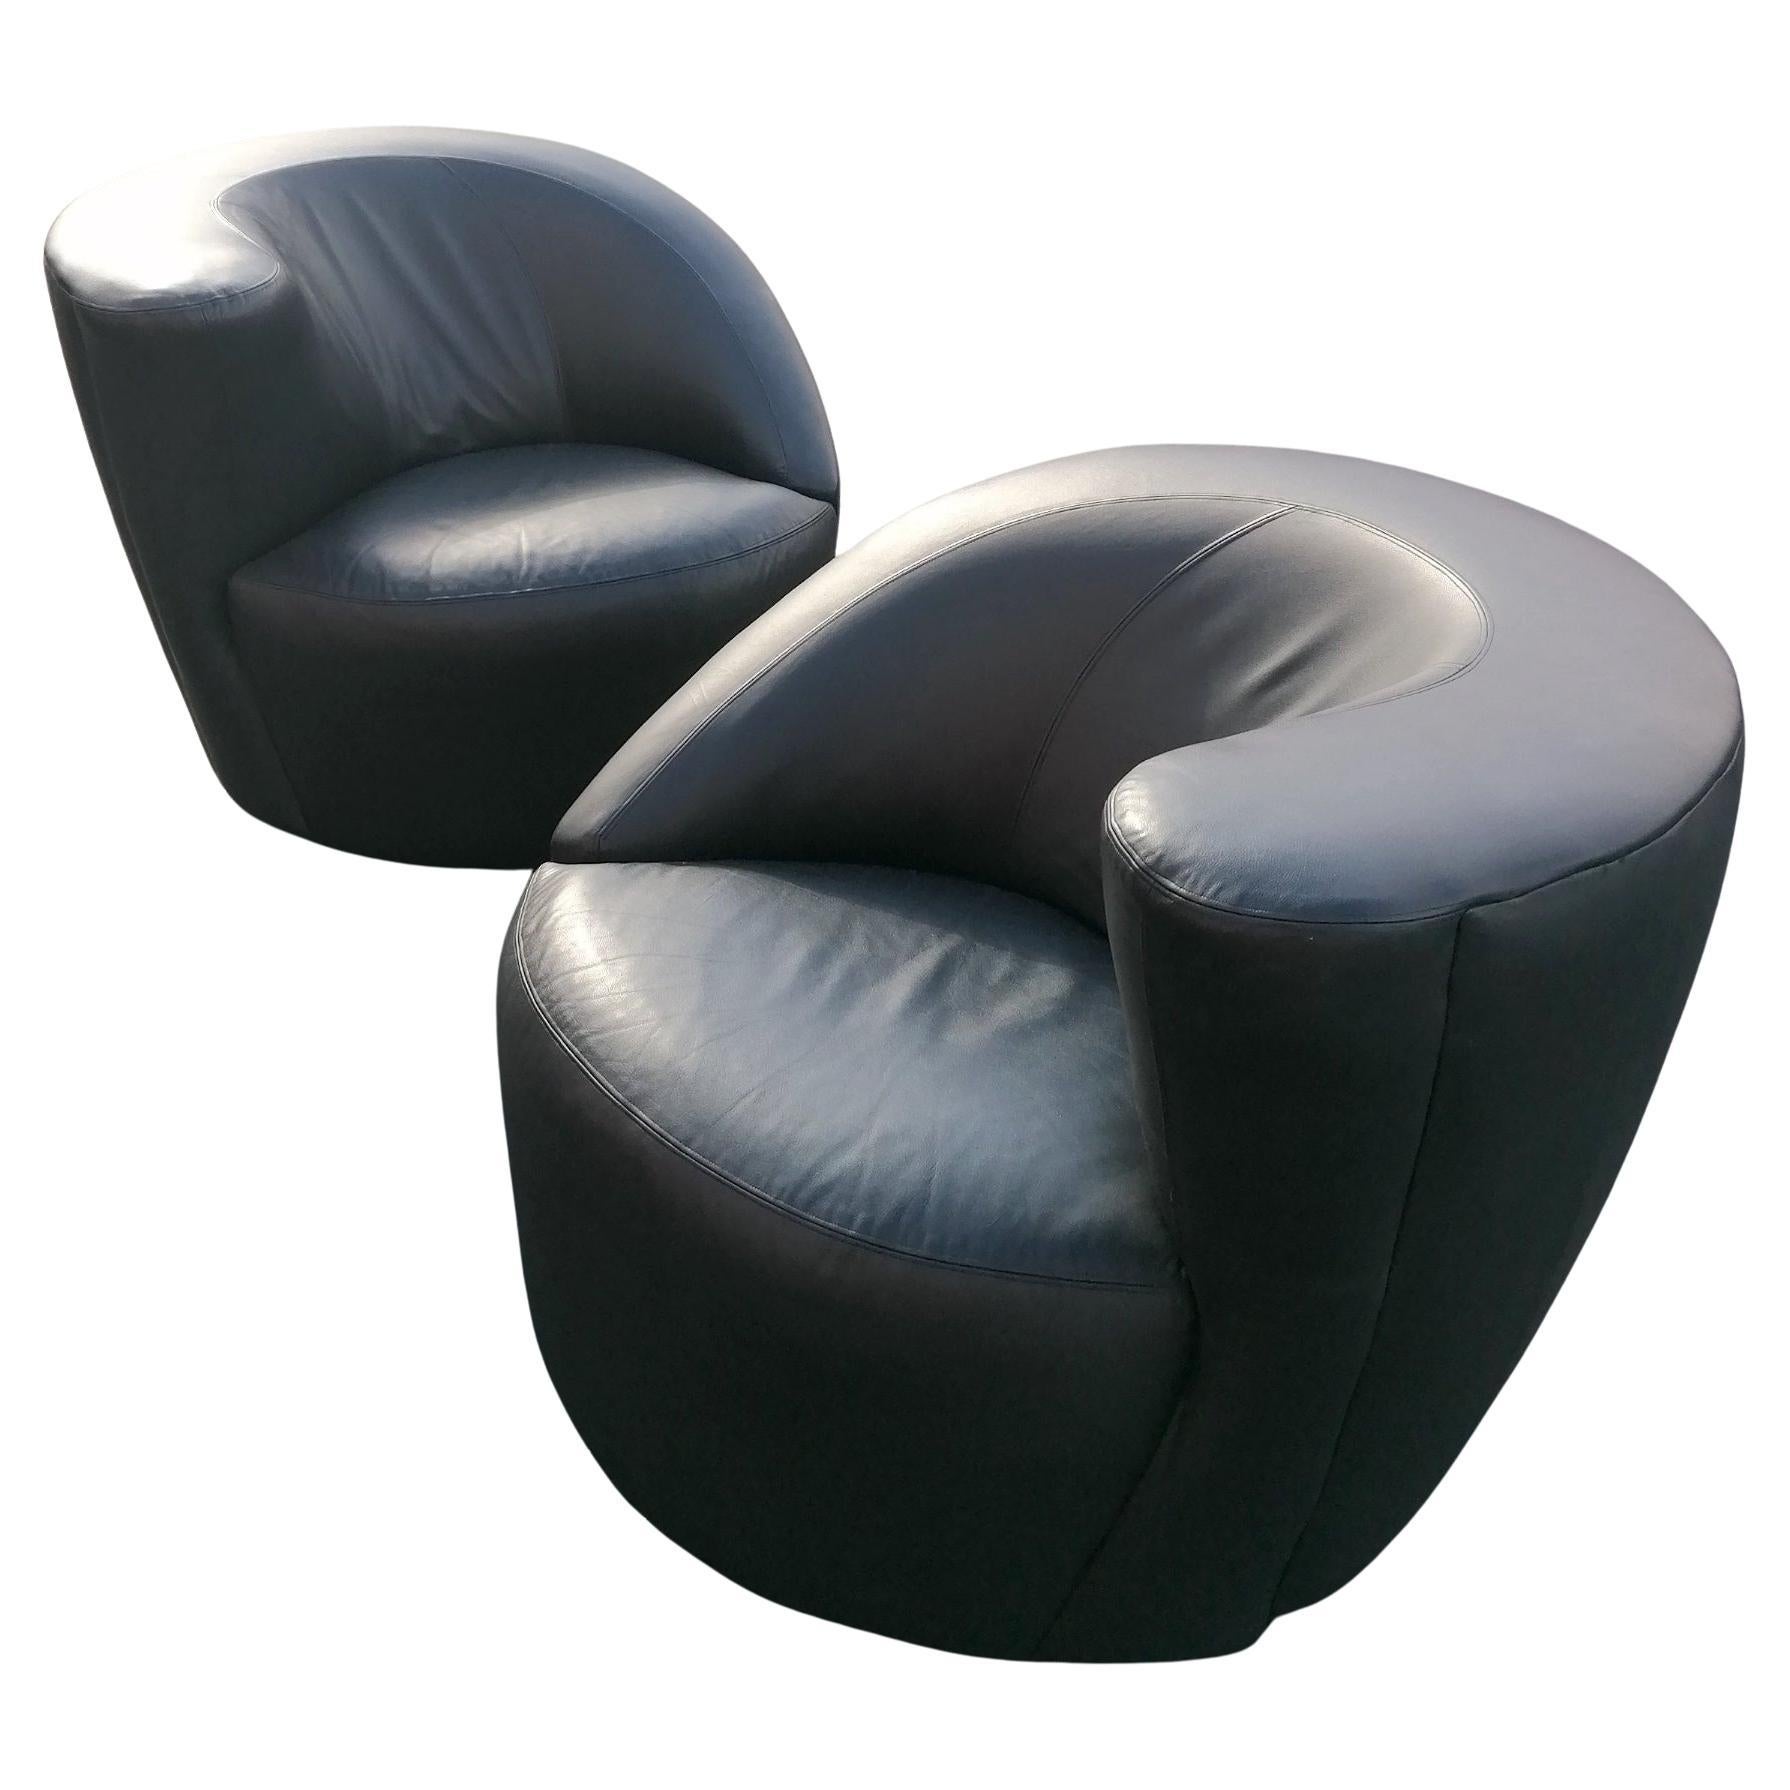 Pair of leather Vladimir Kagan for Directional 'Nautilus' lounge chairs 1970s For Sale